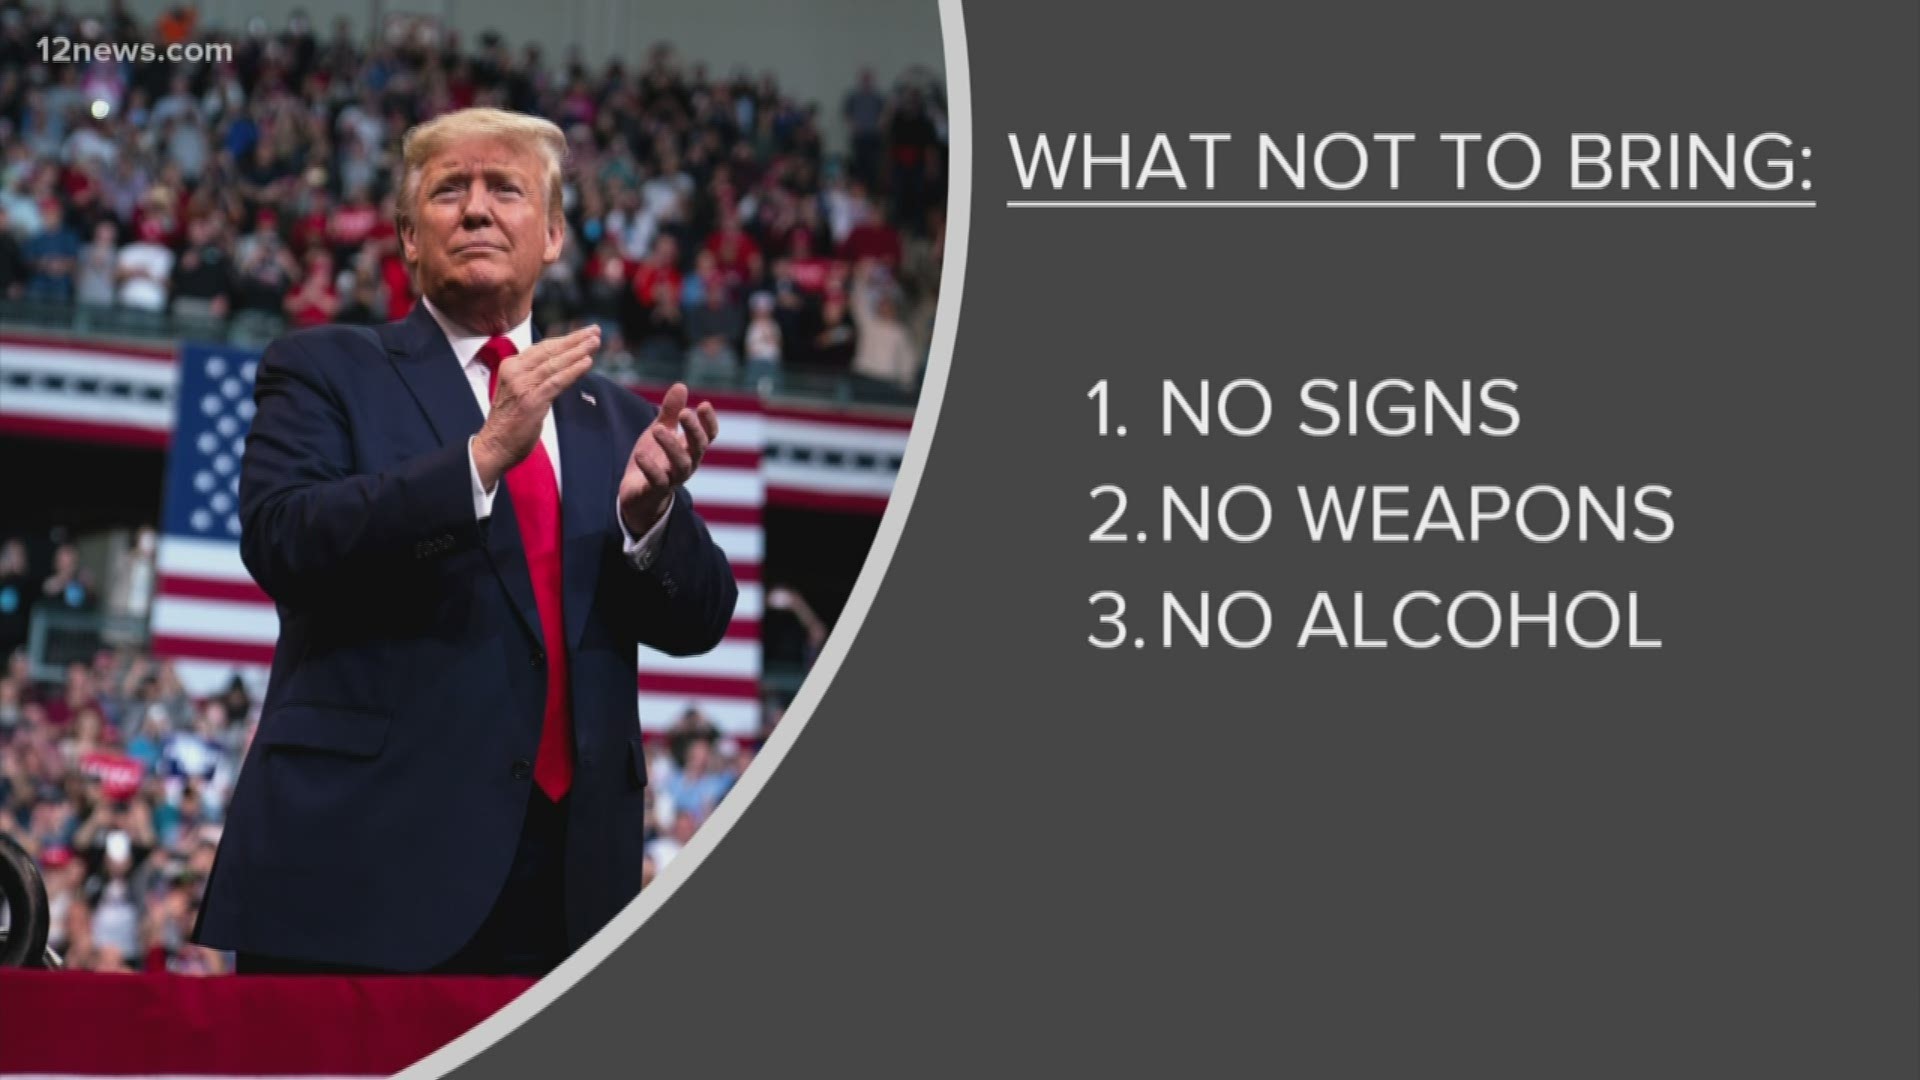 President Donald Trump is holding a rally in Phoenix on Wednesday. Team 12's Jen Wahl has everything you need to know before you go.